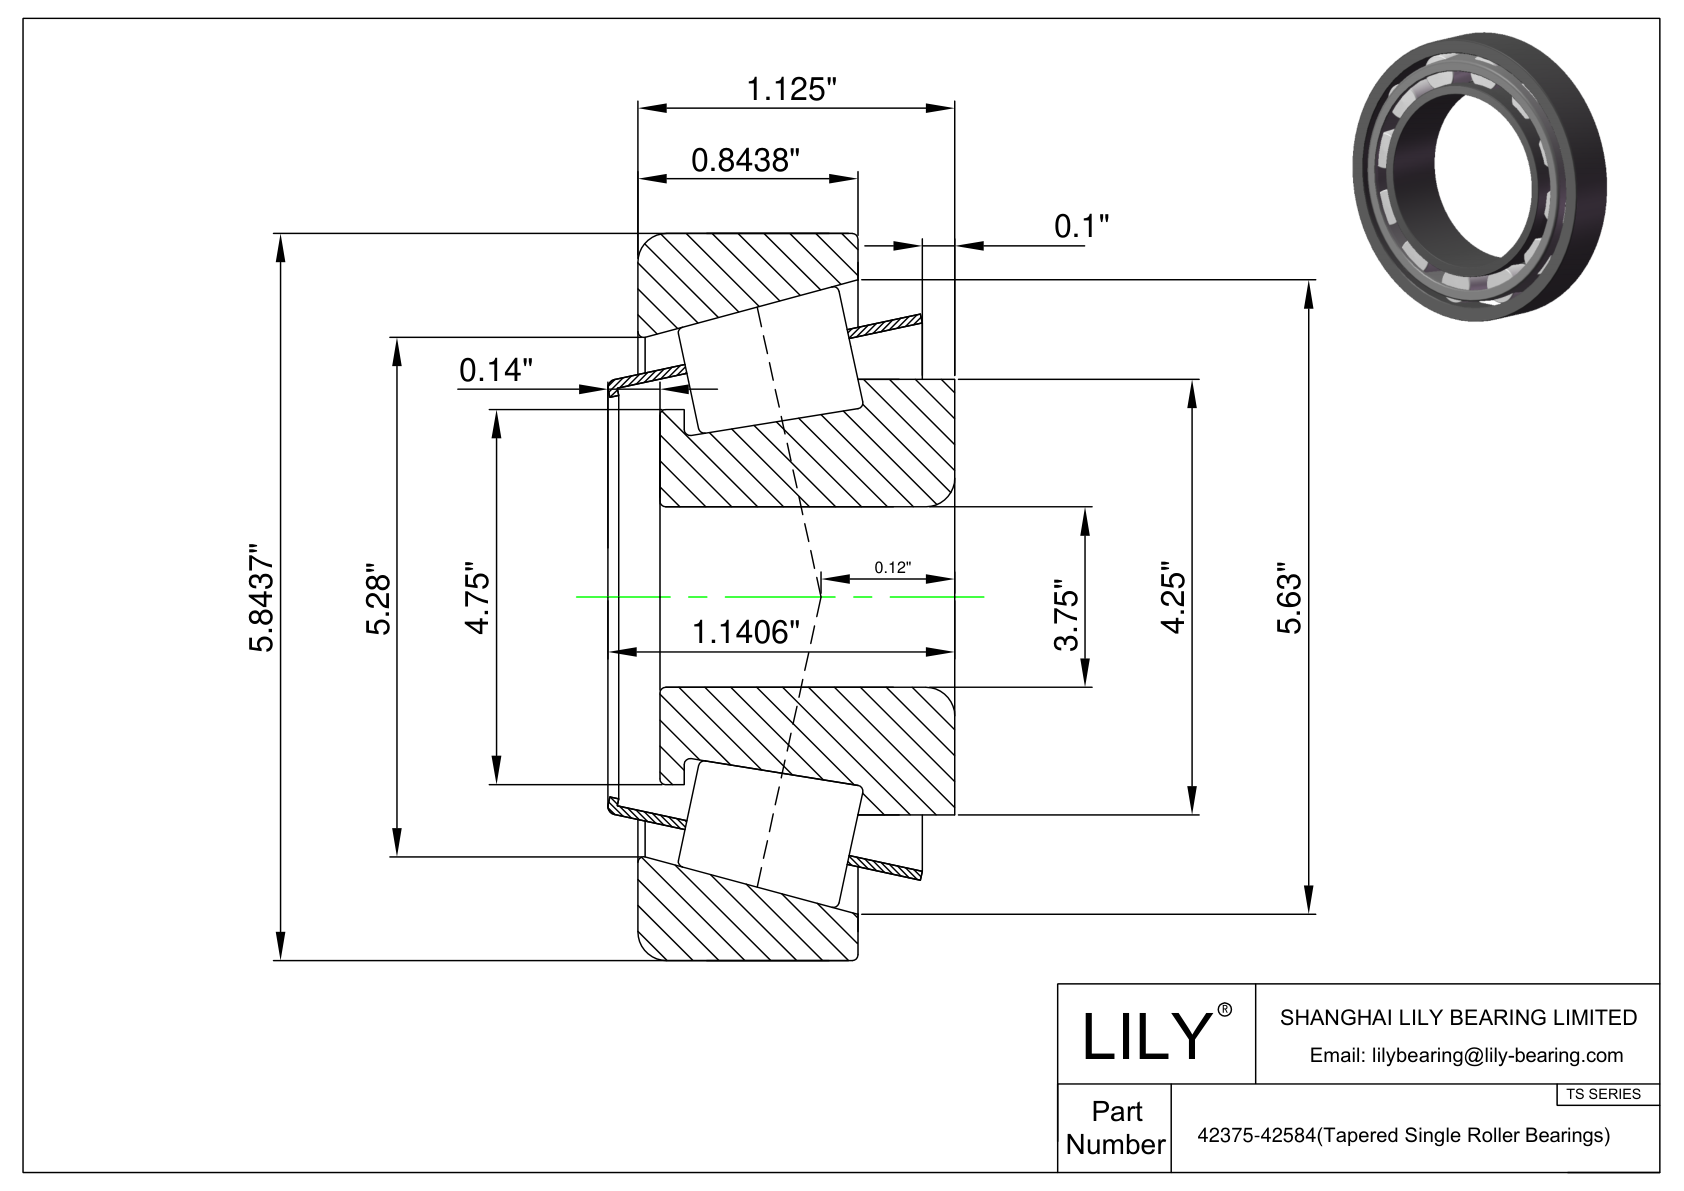 42375-42584 TS (Tapered Single Roller Bearings) (Imperial) cad drawing